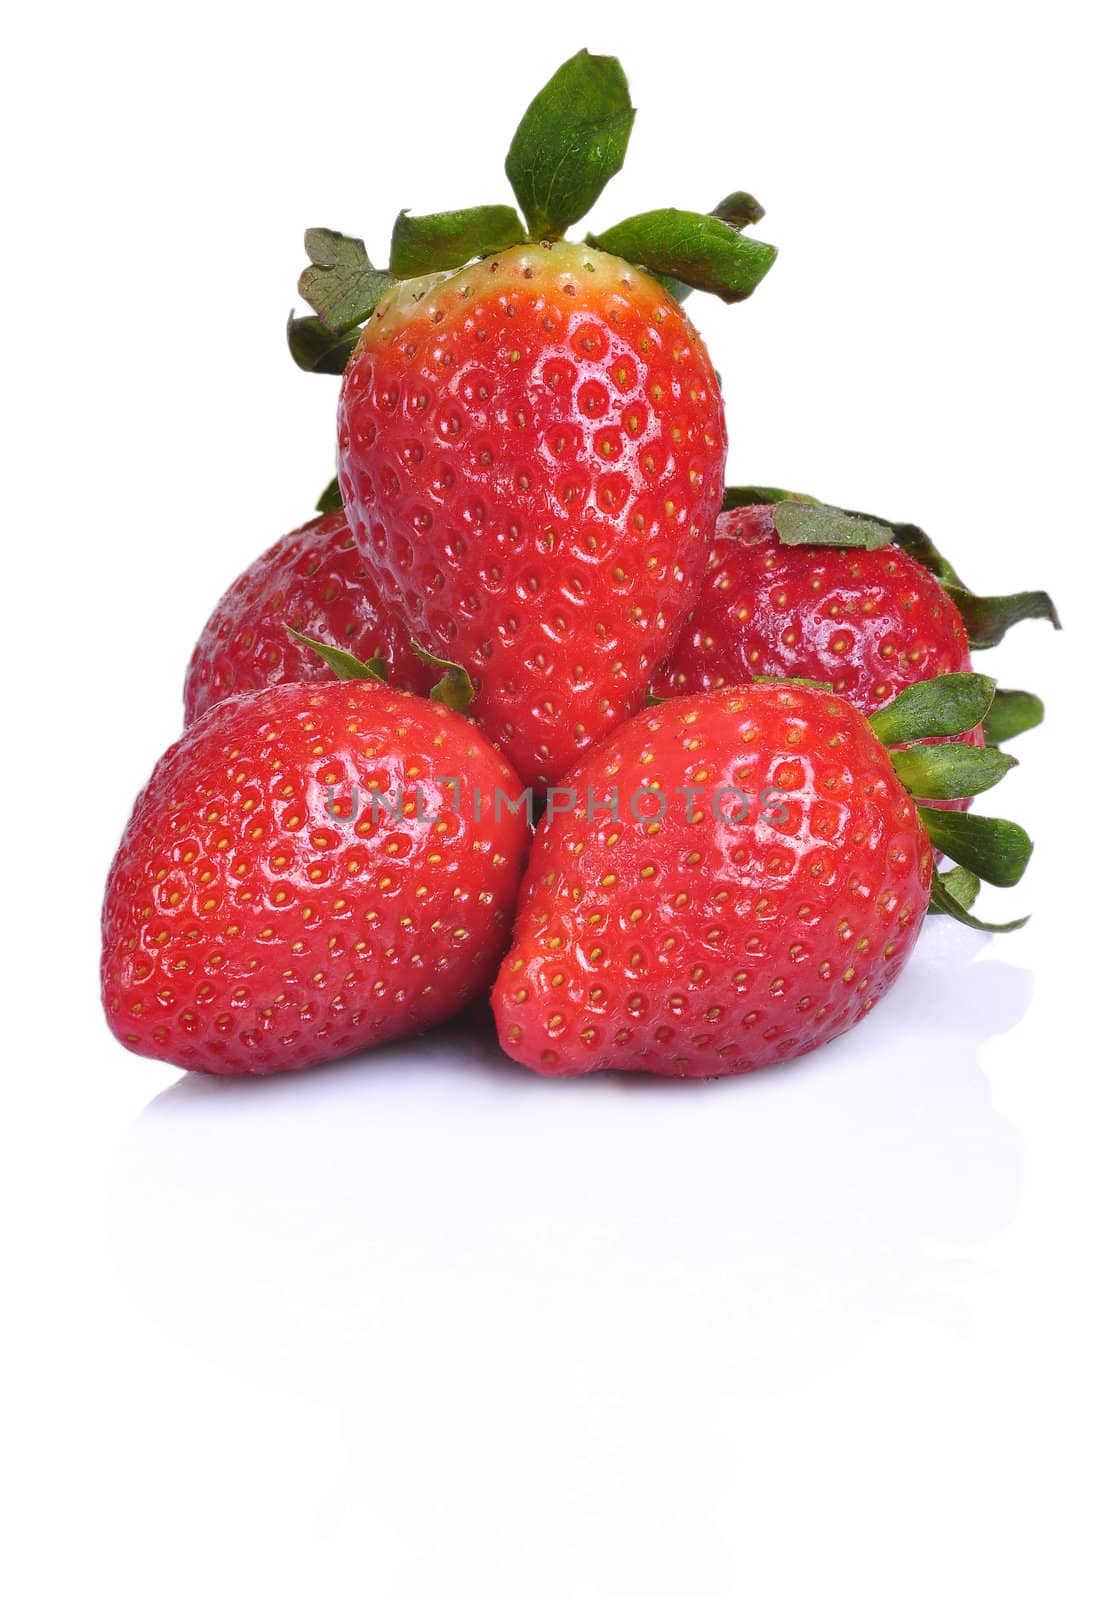 Pile of strawberries, isolated in white, with a shadow underneath